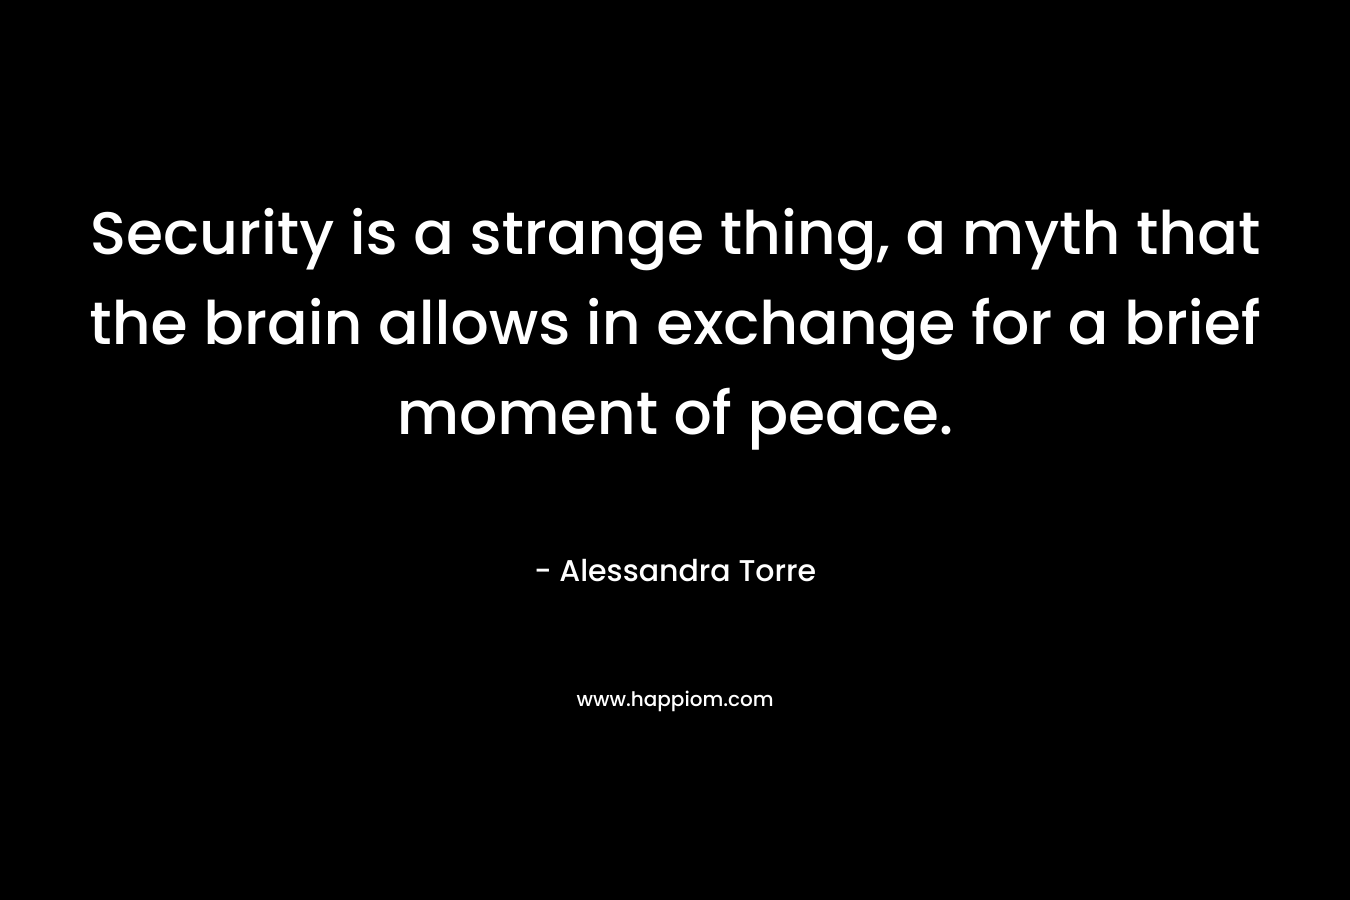 Security is a strange thing, a myth that the brain allows in exchange for a brief moment of peace.